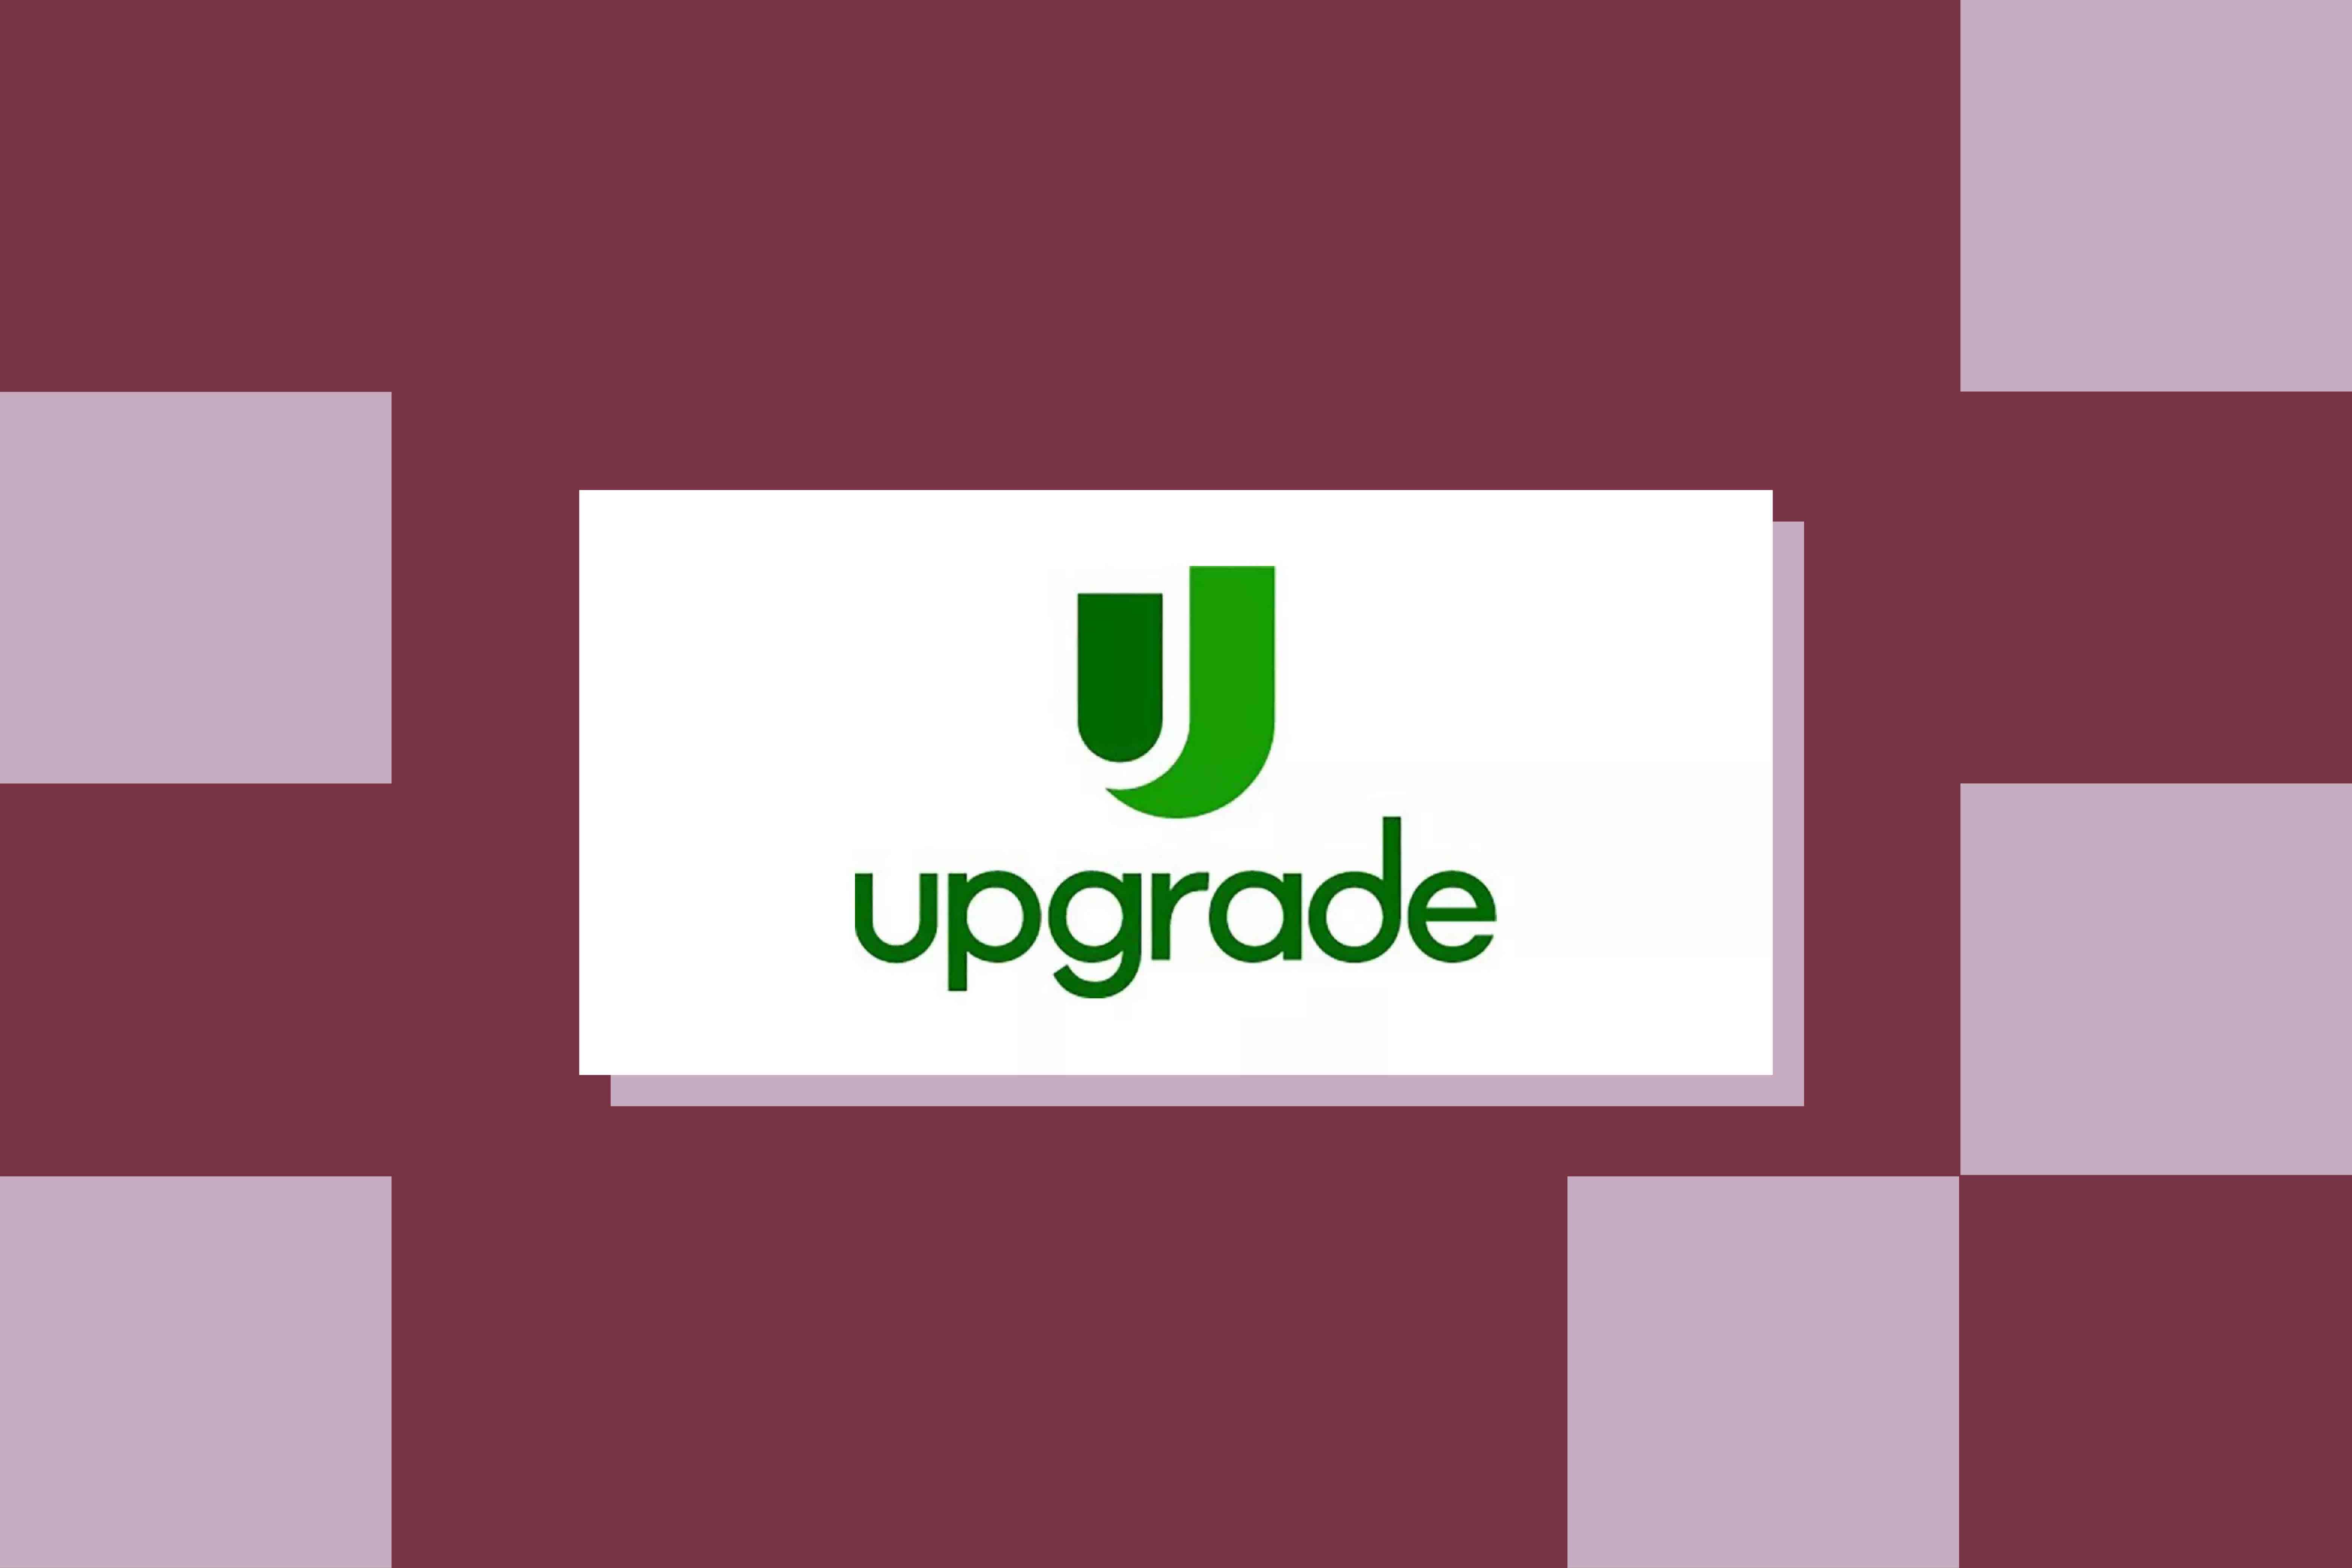 The Upgrade logo rests on a maroon and peach background.